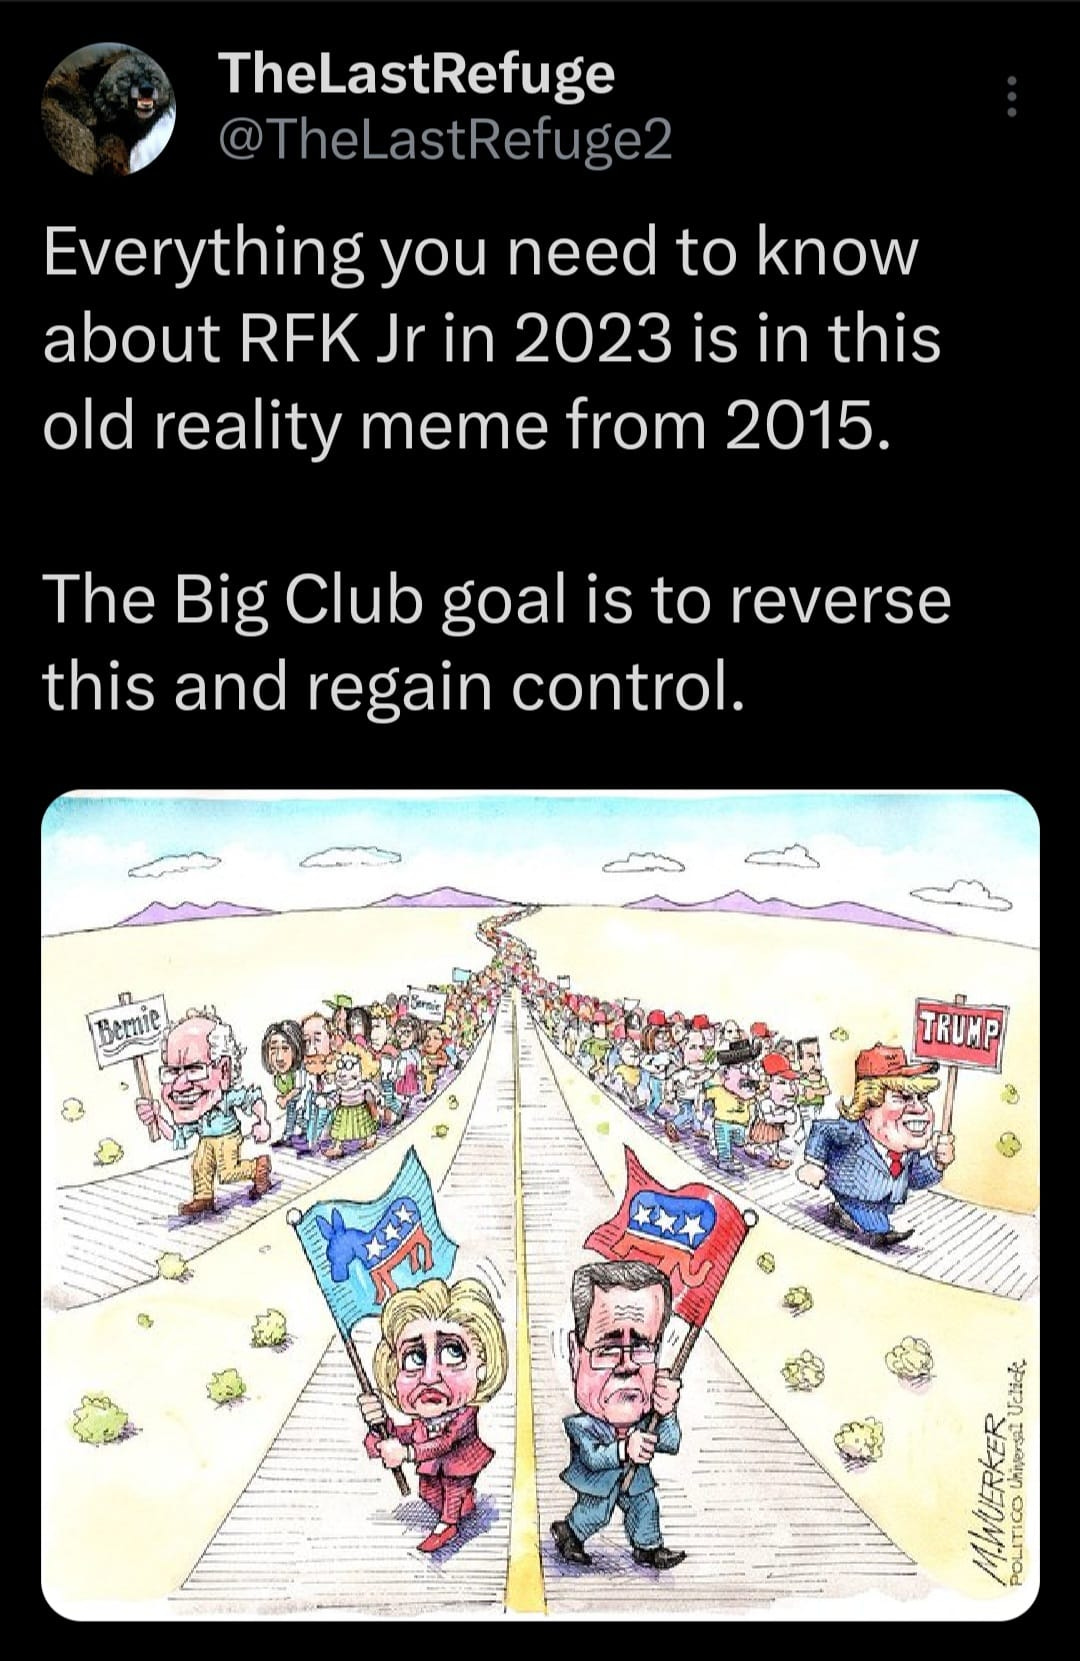 May be an image of text that says 'TheLastRefuge @TheLastRefuge2 Everything you need to know about RFK Jr 2023 is in this old reality meme from 2015. The Big Club goal is to reverse this and regain control. Bernie TRUMP Tcle AWUERKER M.WUERKER POLITICO Linnorals'